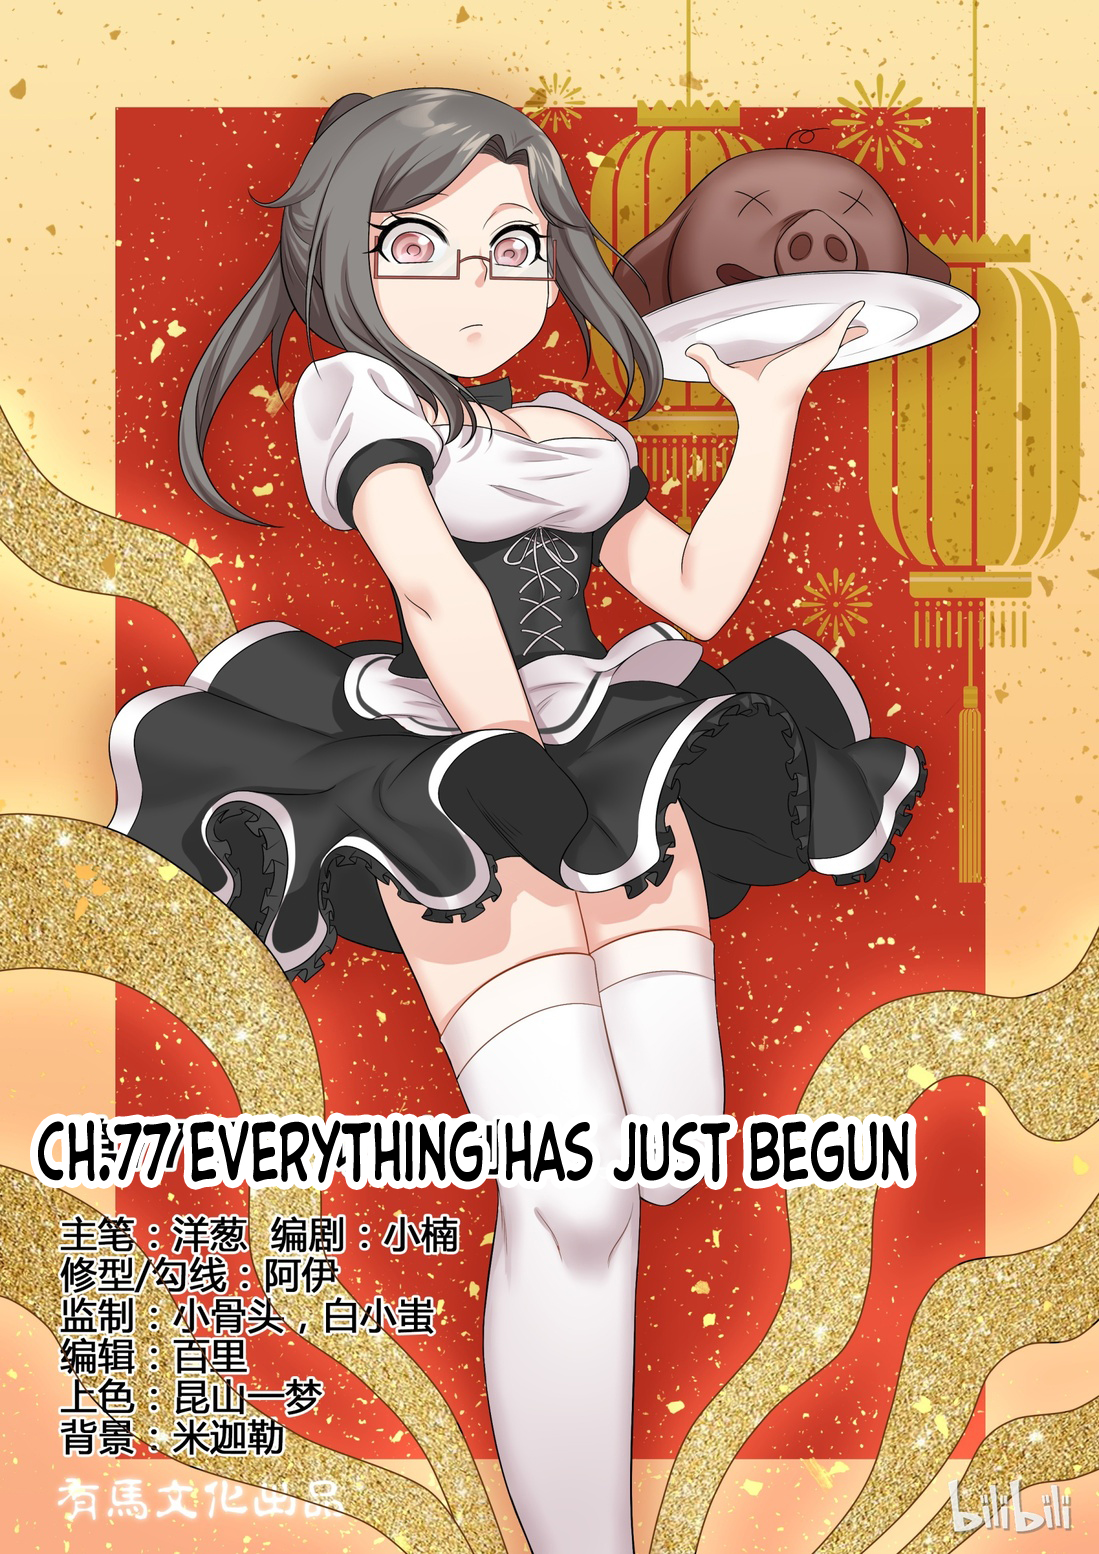 My Wife Is a Fox Spirit Ch. 77 everything has just begun